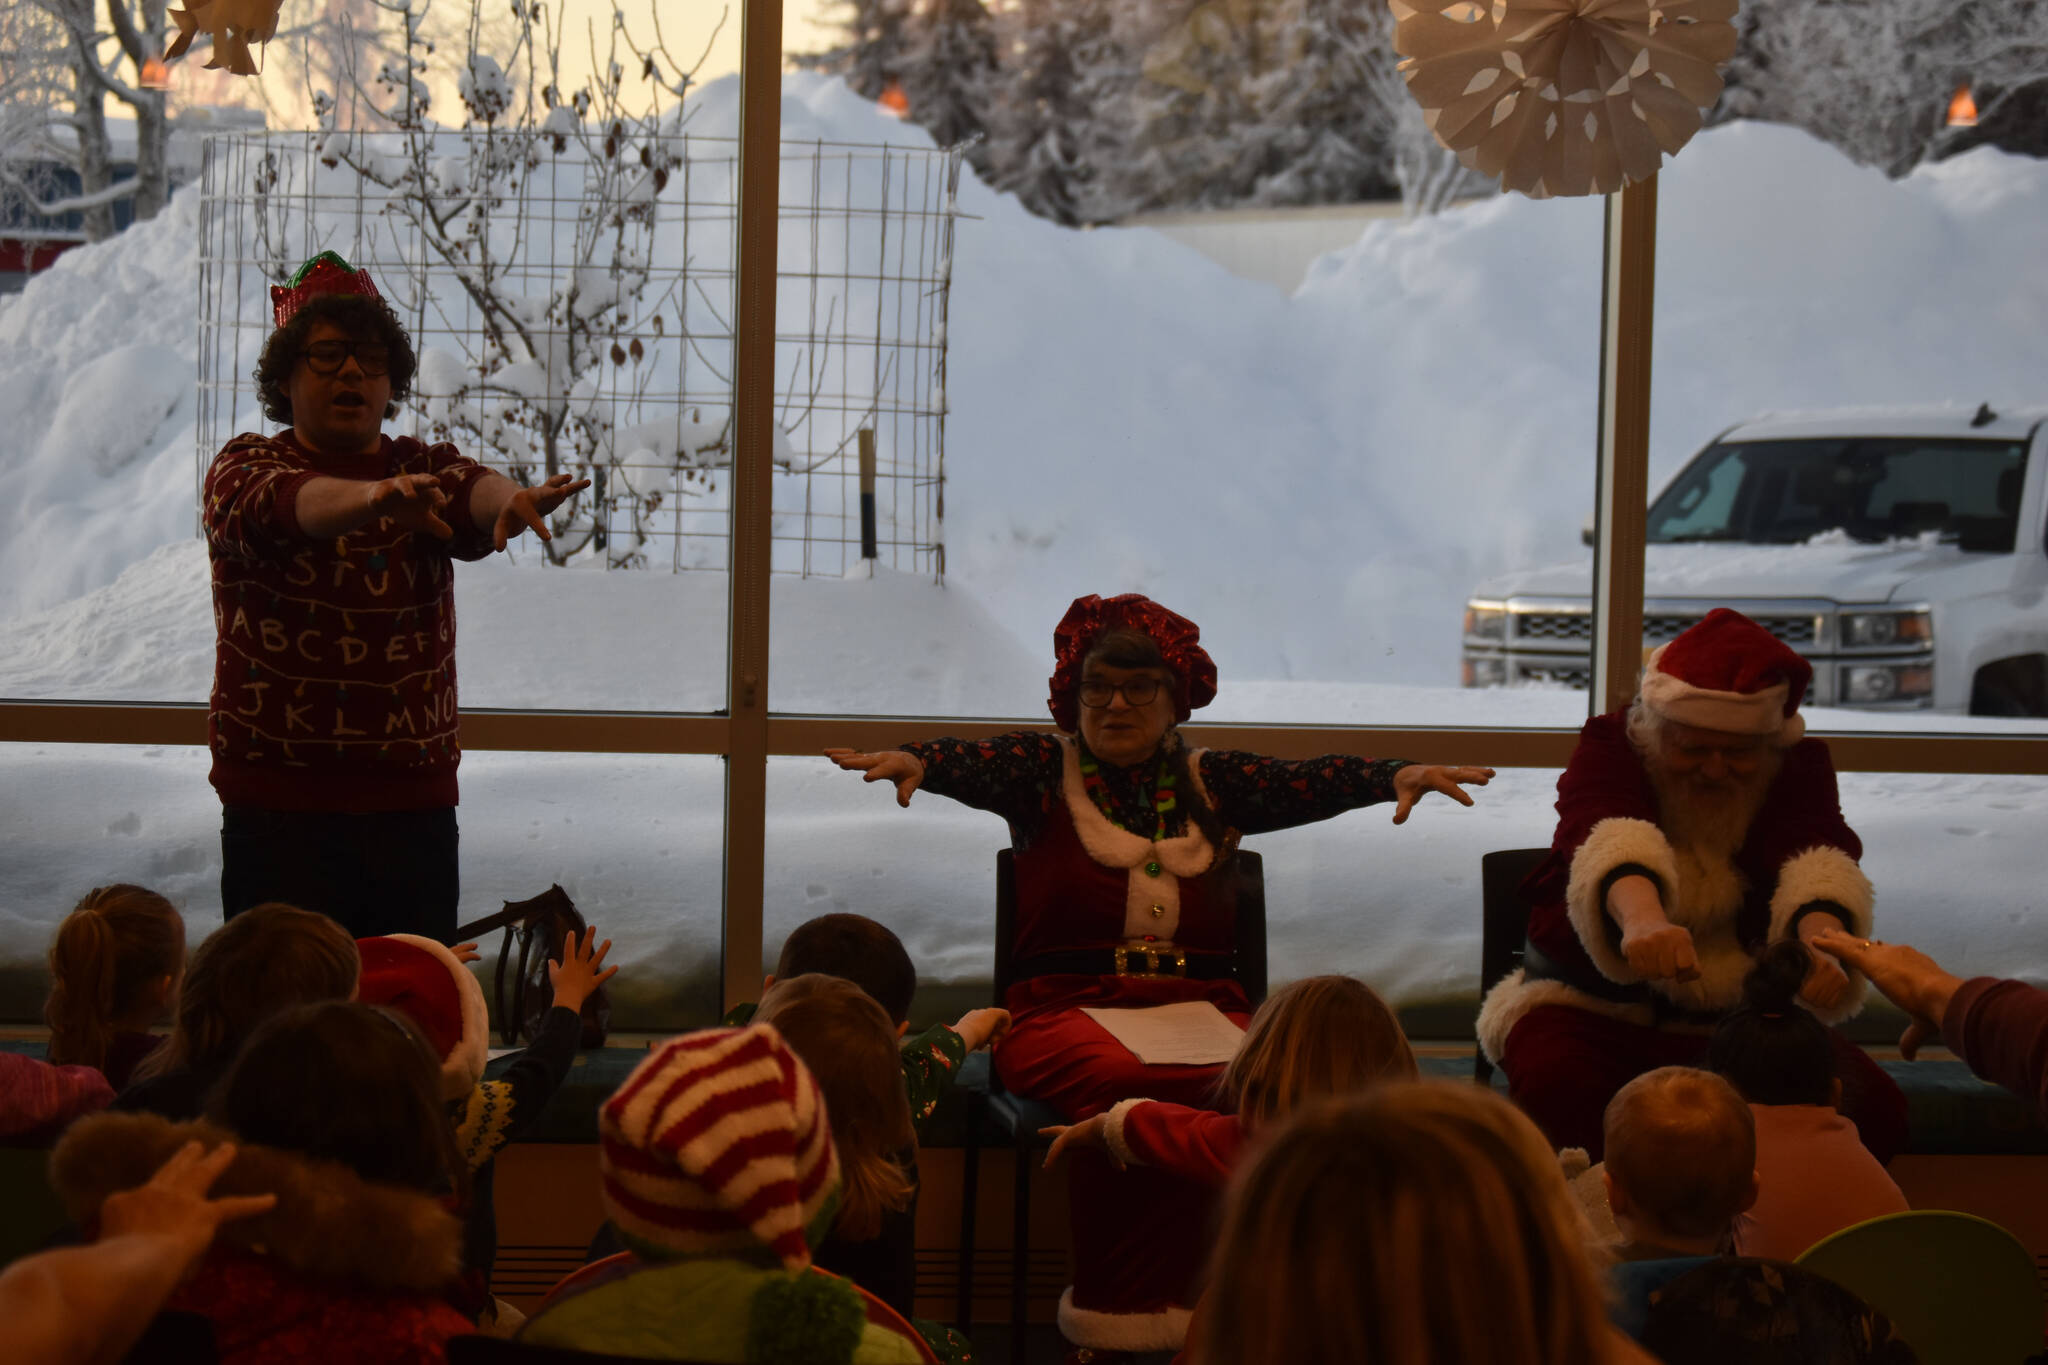 Mrs. Claus (Kit Hill) and Santa (Ken Aaron) stretch their arms as they participate in a song during Story Time with Mrs. Claus at the Kenai Community Library in Kenai, Alaska, on Monday, Dec. 19, 2022. (Jake Dye/Peninsula Clarion)